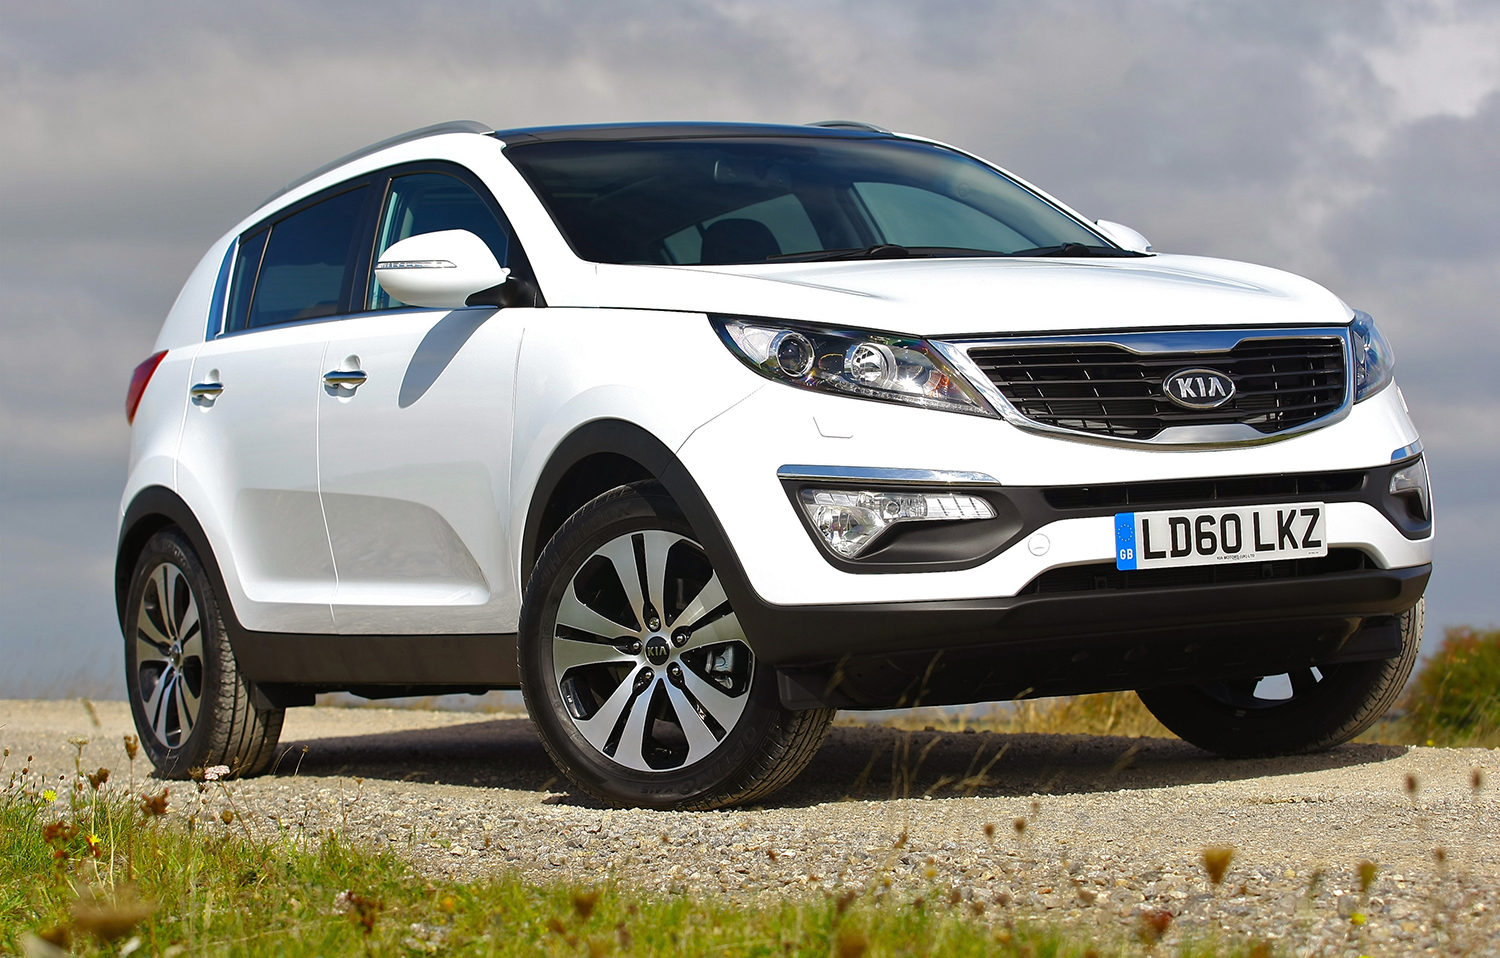 Cars for new parents buying guide: Kia Sportage